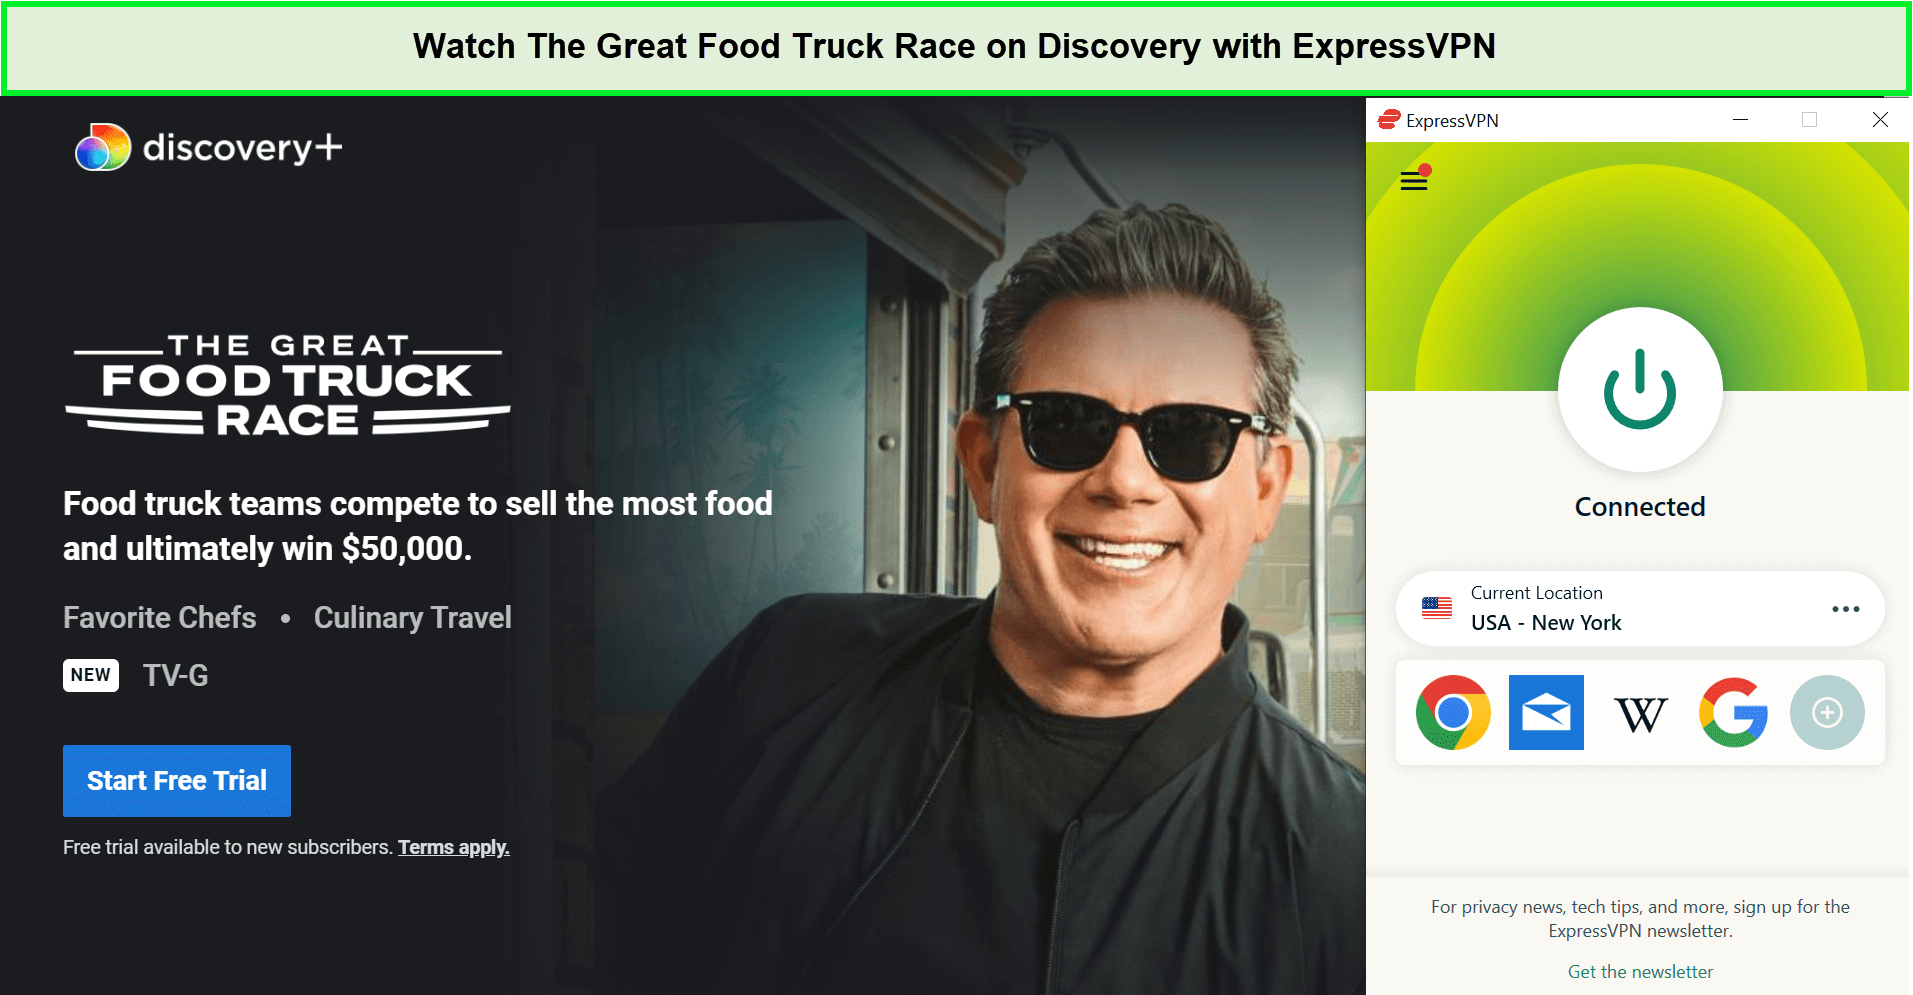 Watch-The-Great-Food-Truck-Race-in-es-on-Discovery-with-ExpressVPN